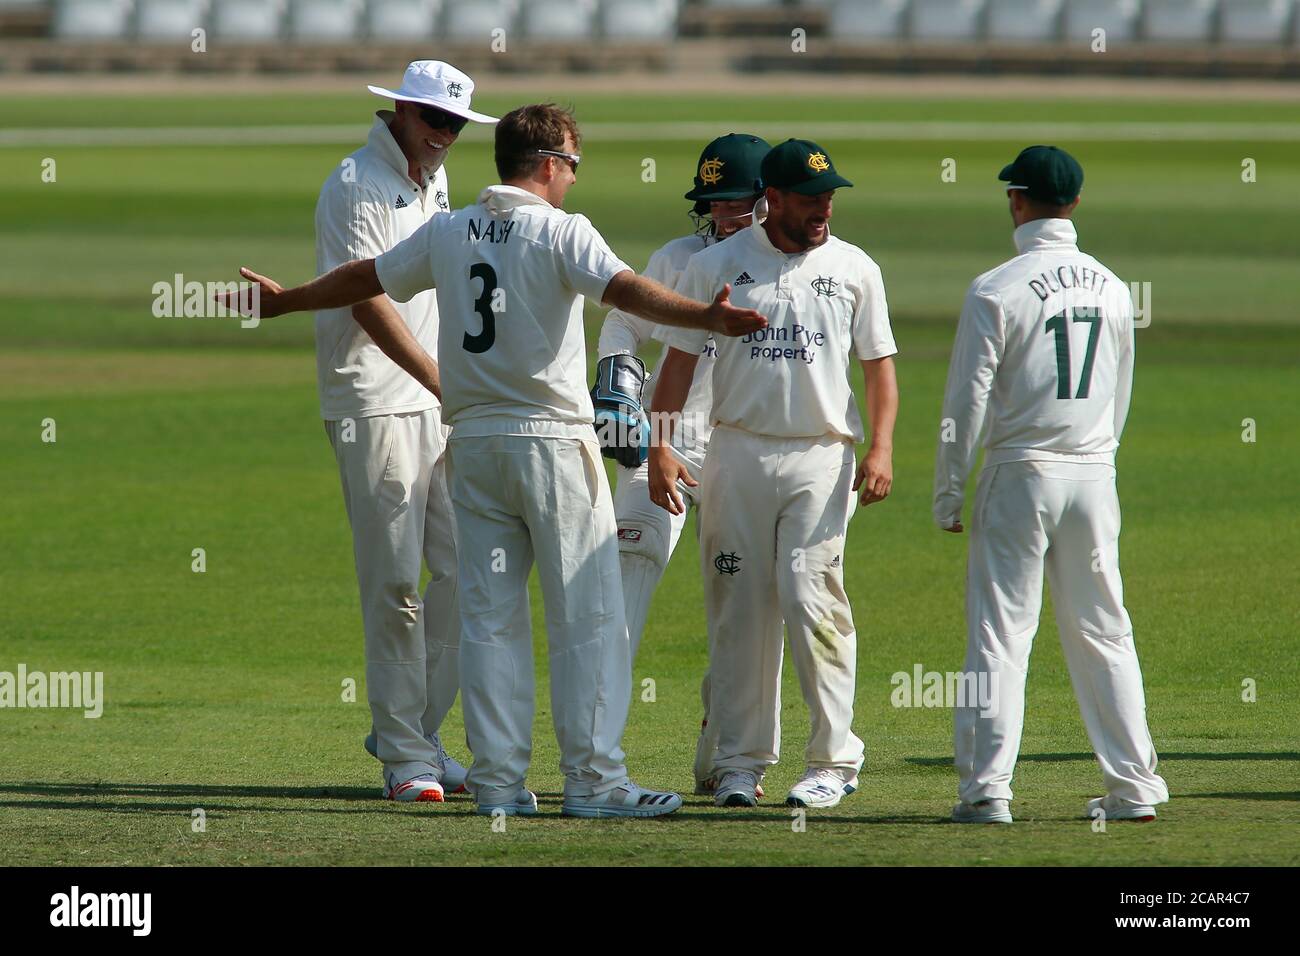 Nottinghamshire County Cricket Club, Trent Bridge, West Bridgford, Nottingham, Nottinghamshire, 8th August 2020. Bob Willis Trophy - Nottinghamshire County Cricket Club v Yorkshire County Cricket Club, Day 1. Chris Nash of Nottinghamshire County Cricket Club celebrates taking the wicket of Harry Brooks of Yorkshire with his team mates. Credit: Touchlinepics/Alamy Live News Stock Photo